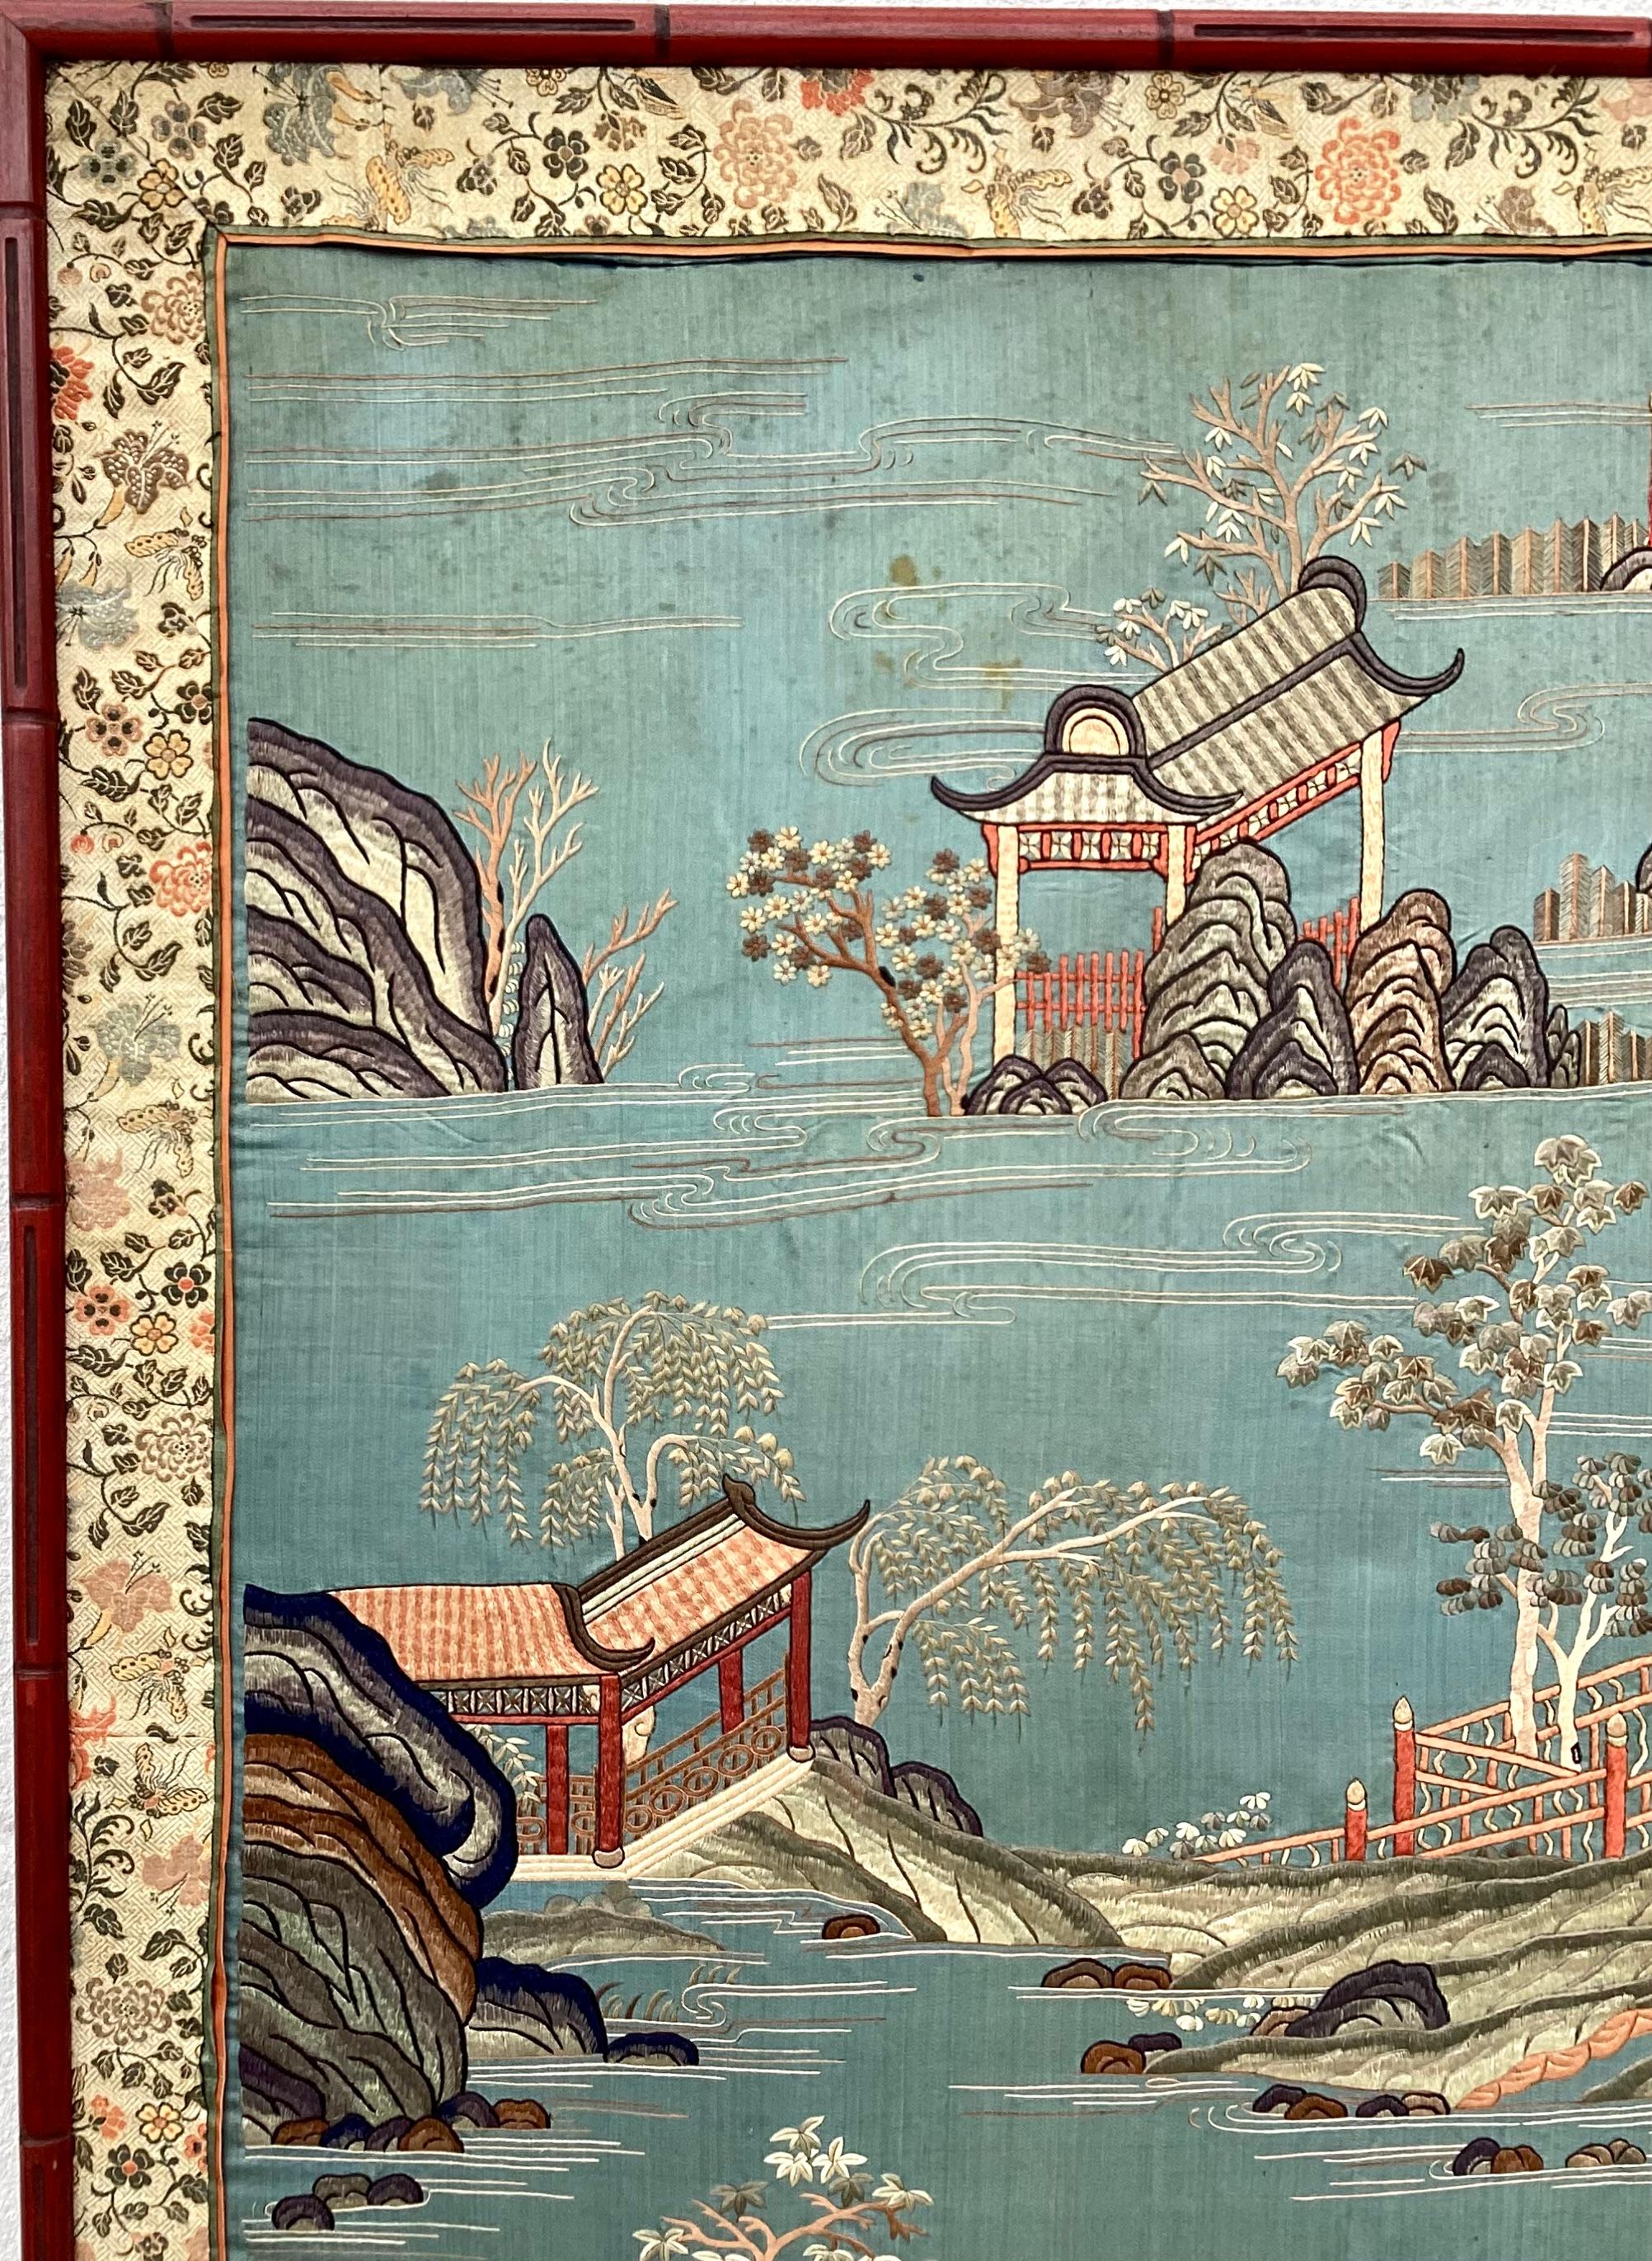 This tall Chinese silk embroidery depicts Asian figures and scenes of boats, bridges and Asian landscapes. Features red, green, salmon and white colors on a beautiful serene blue background. It is framed with a red faux bamboo frame.